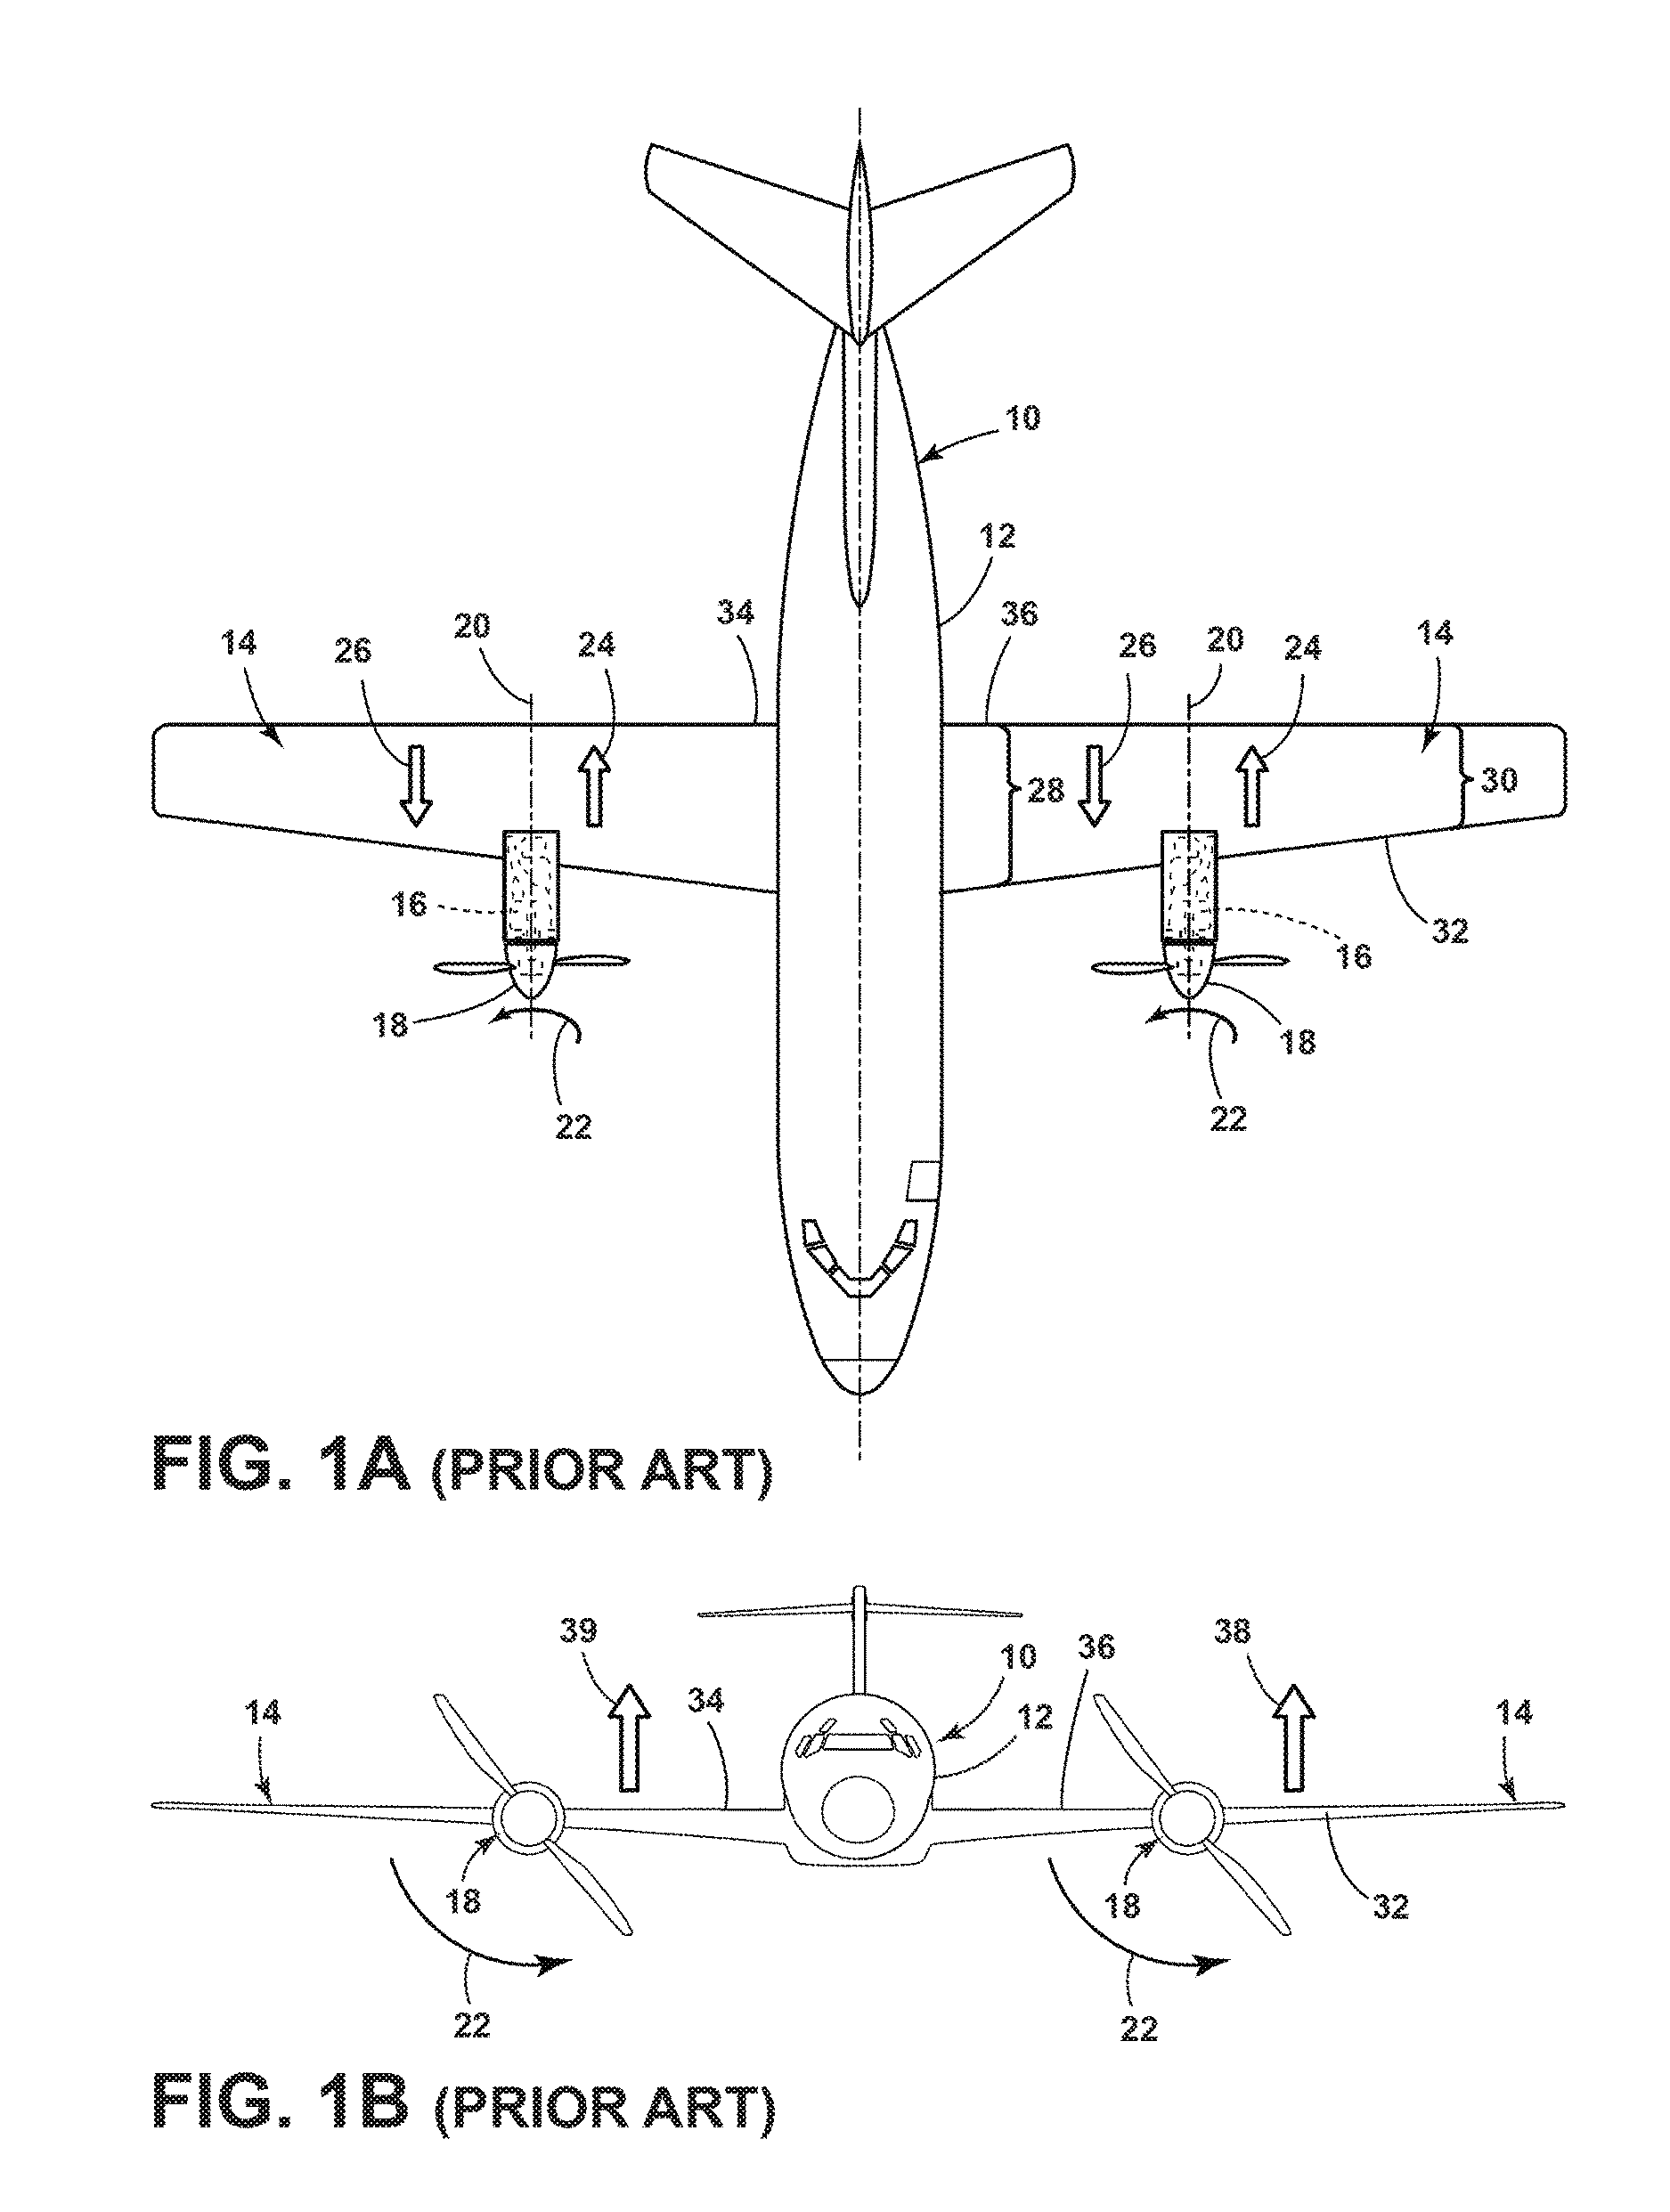 Aircraft and method of countering aerodynamic effects of propeller wake